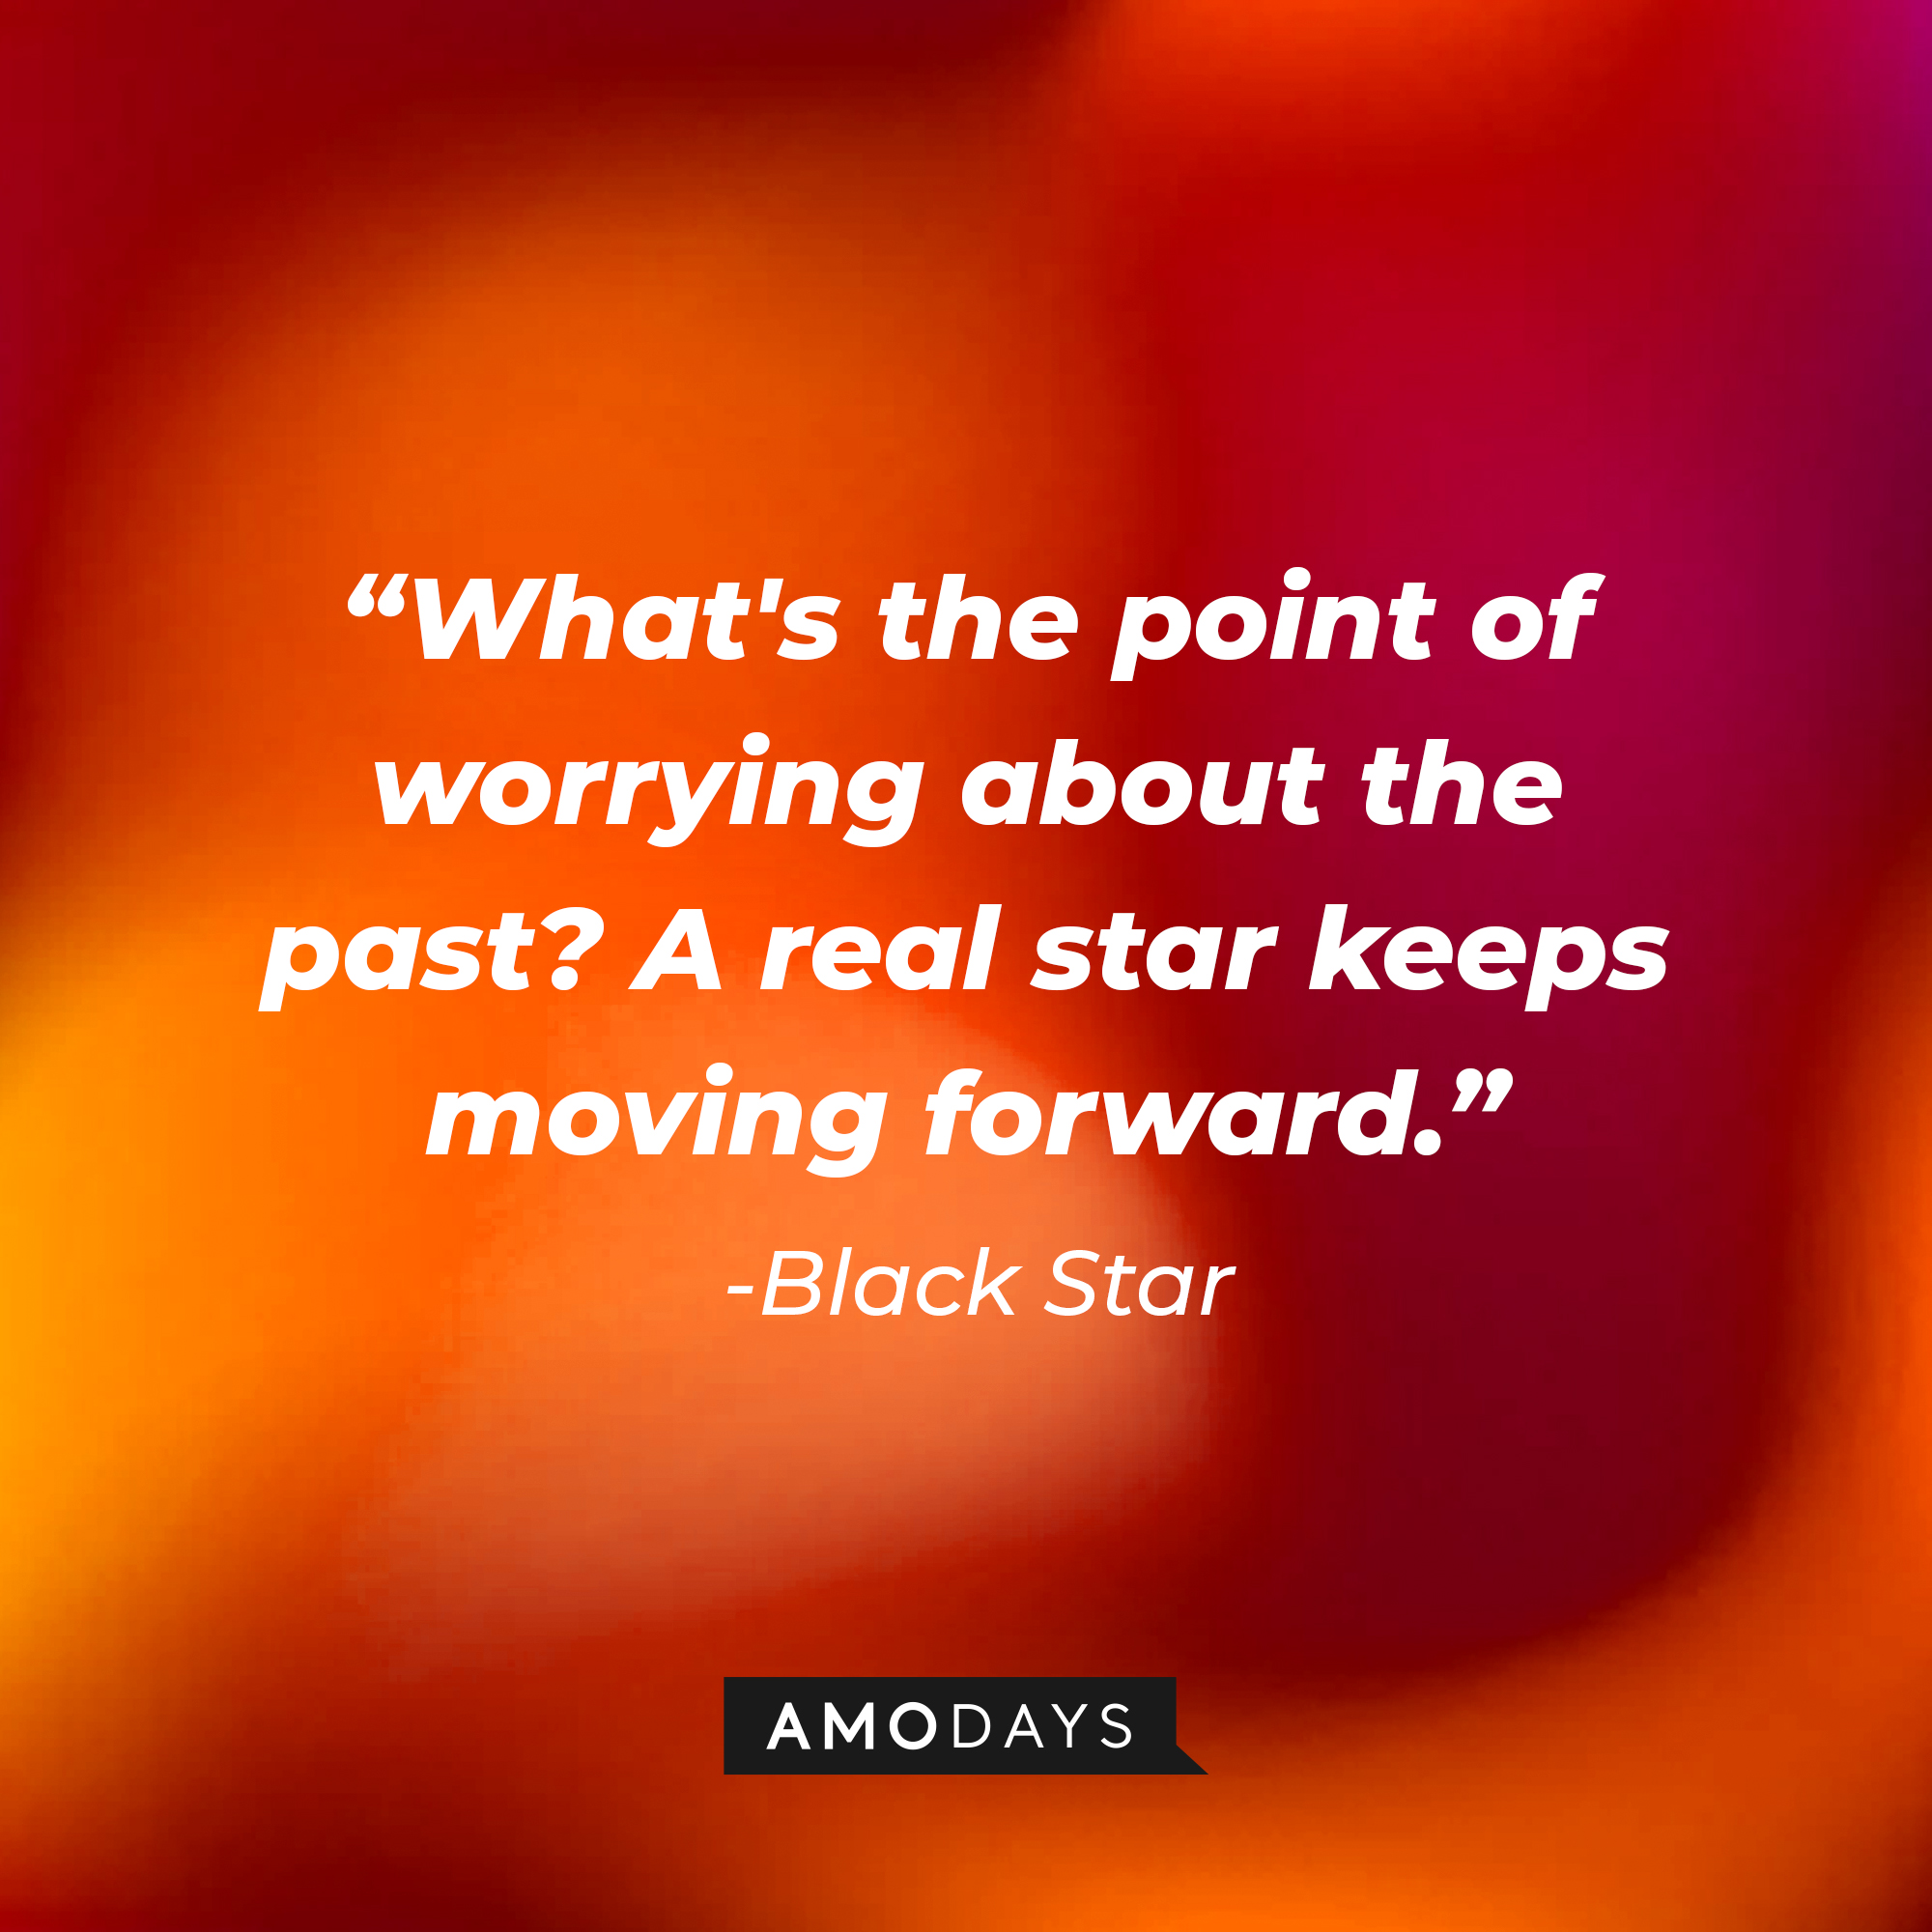 Black Star’s quote: "What's the point of worrying about the past? A real star keeps moving forward." | Image: AmoDays